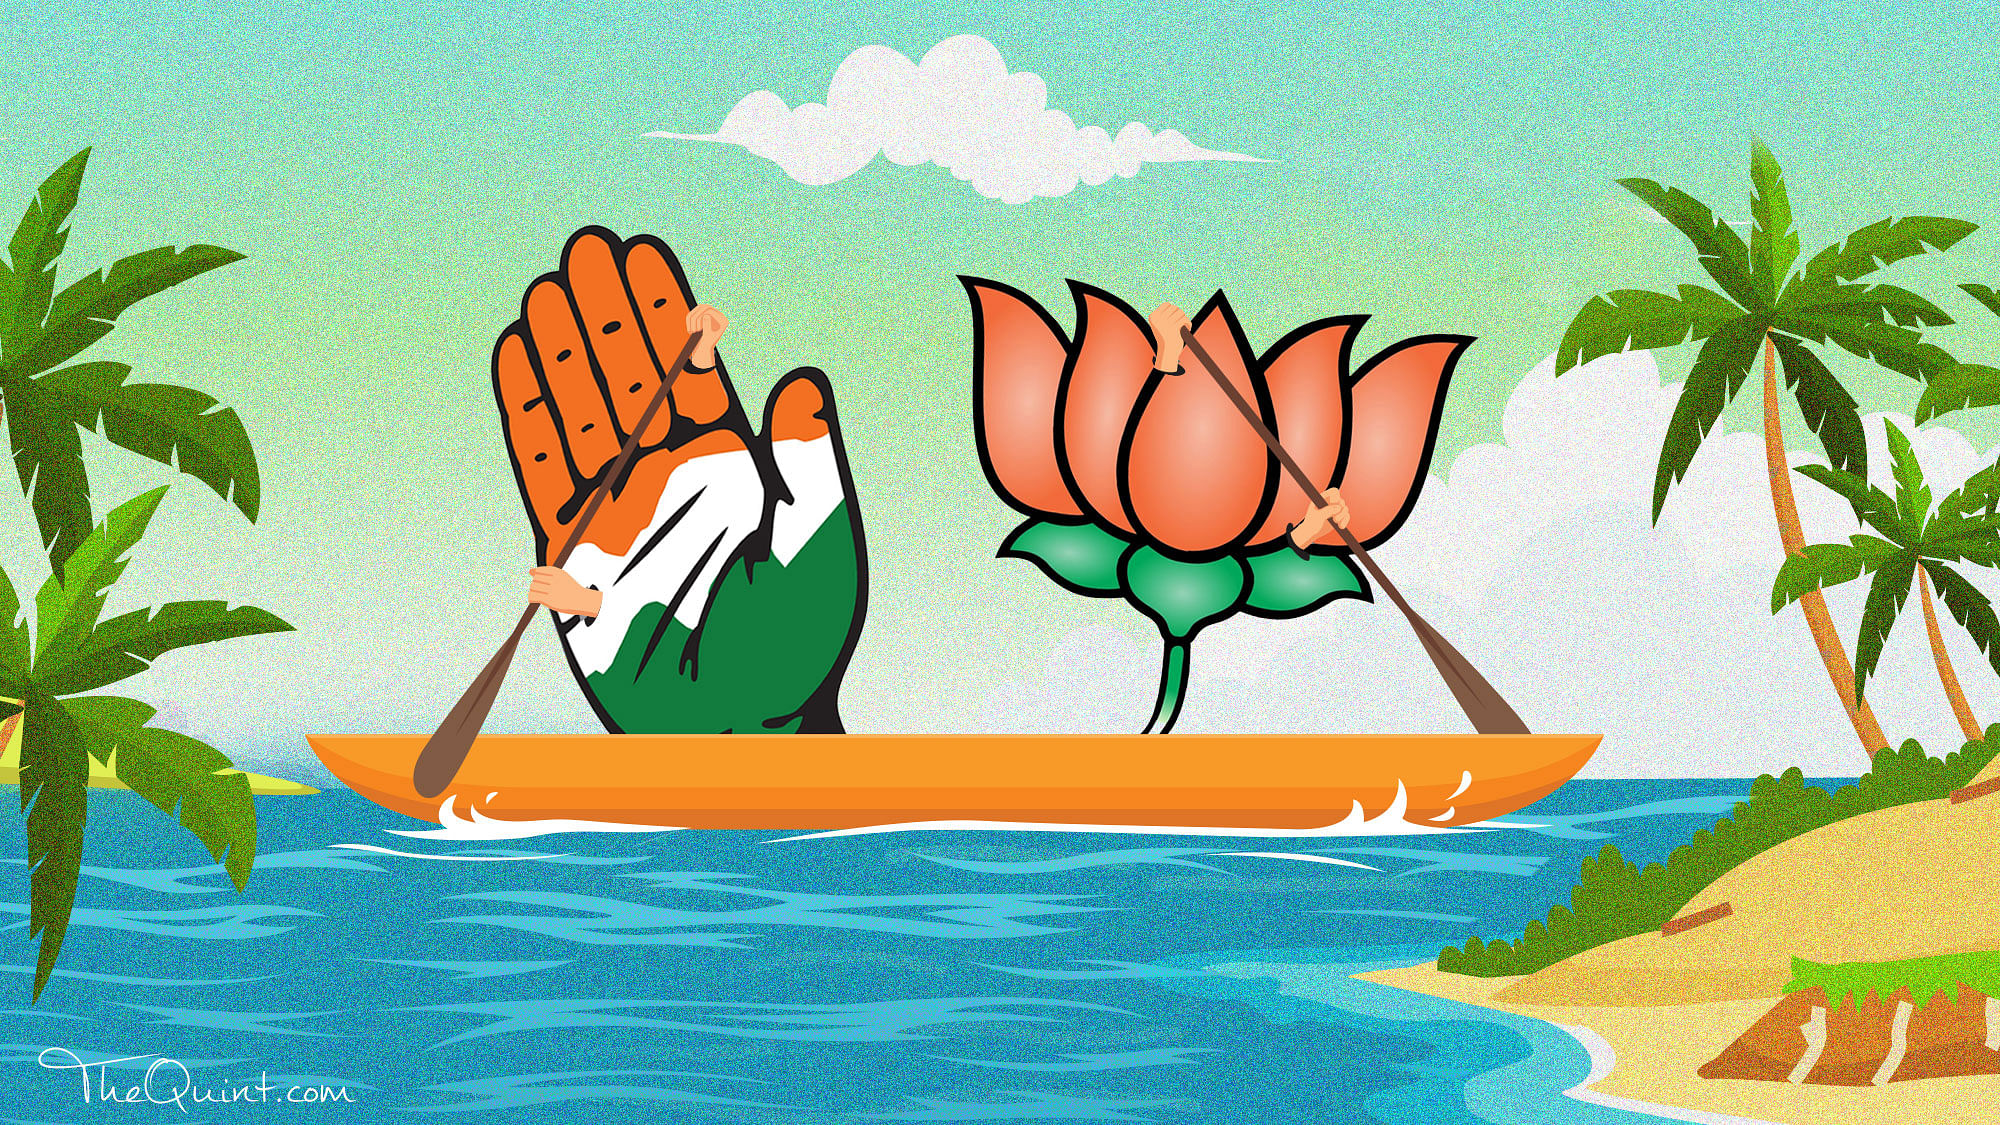 Although Goans have voted for a hung assembly with the Congress as the single largest party, the BJP gained the support of other MLAs to form government. (Photo: The Quint) 